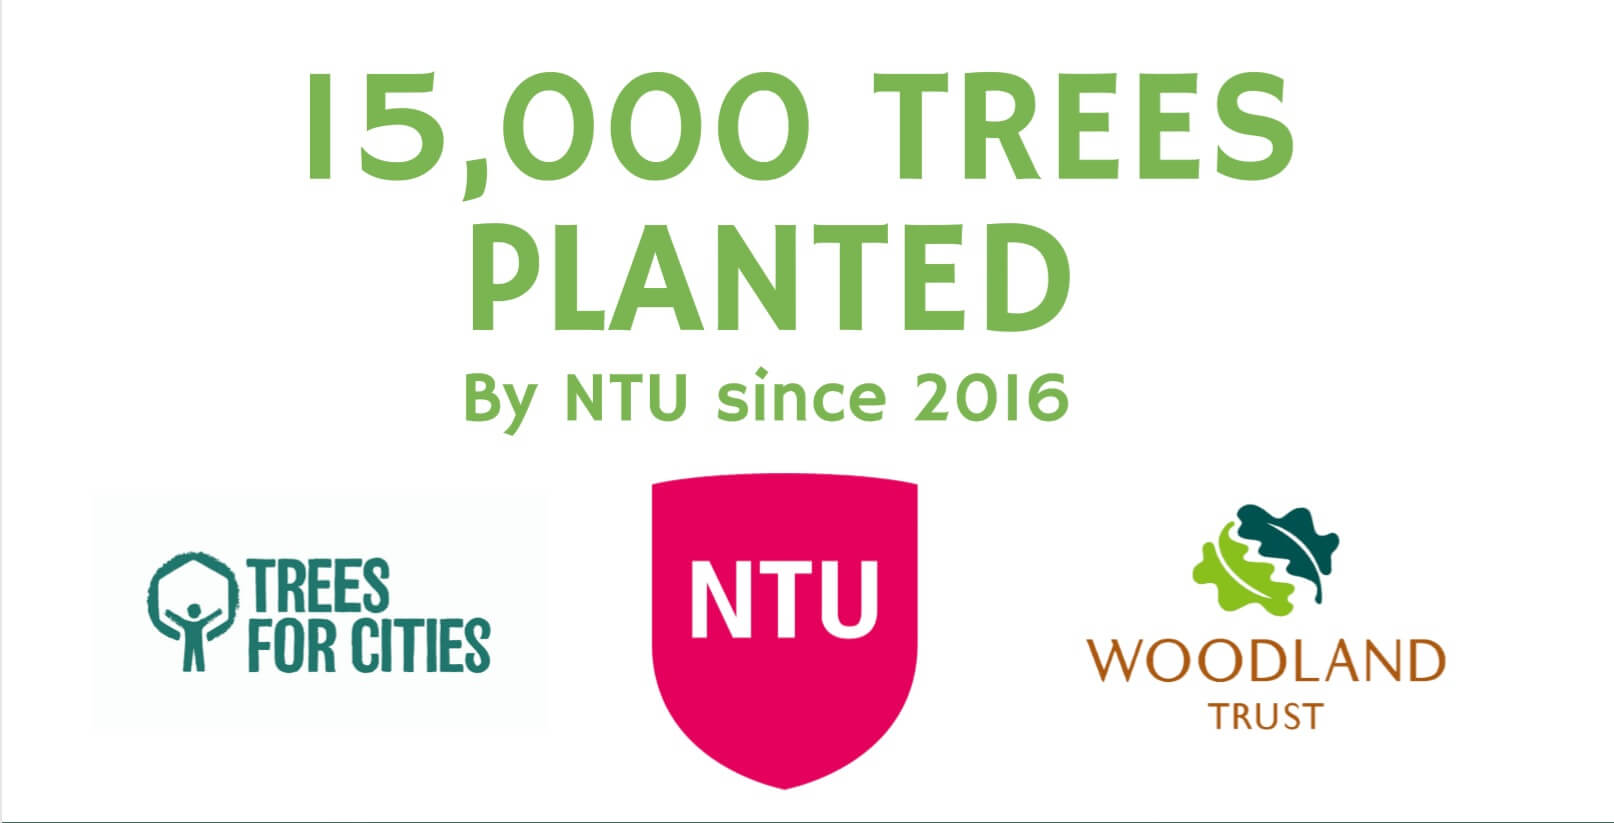 infographic explaining 15000 trees have been planted by NTU since 2016